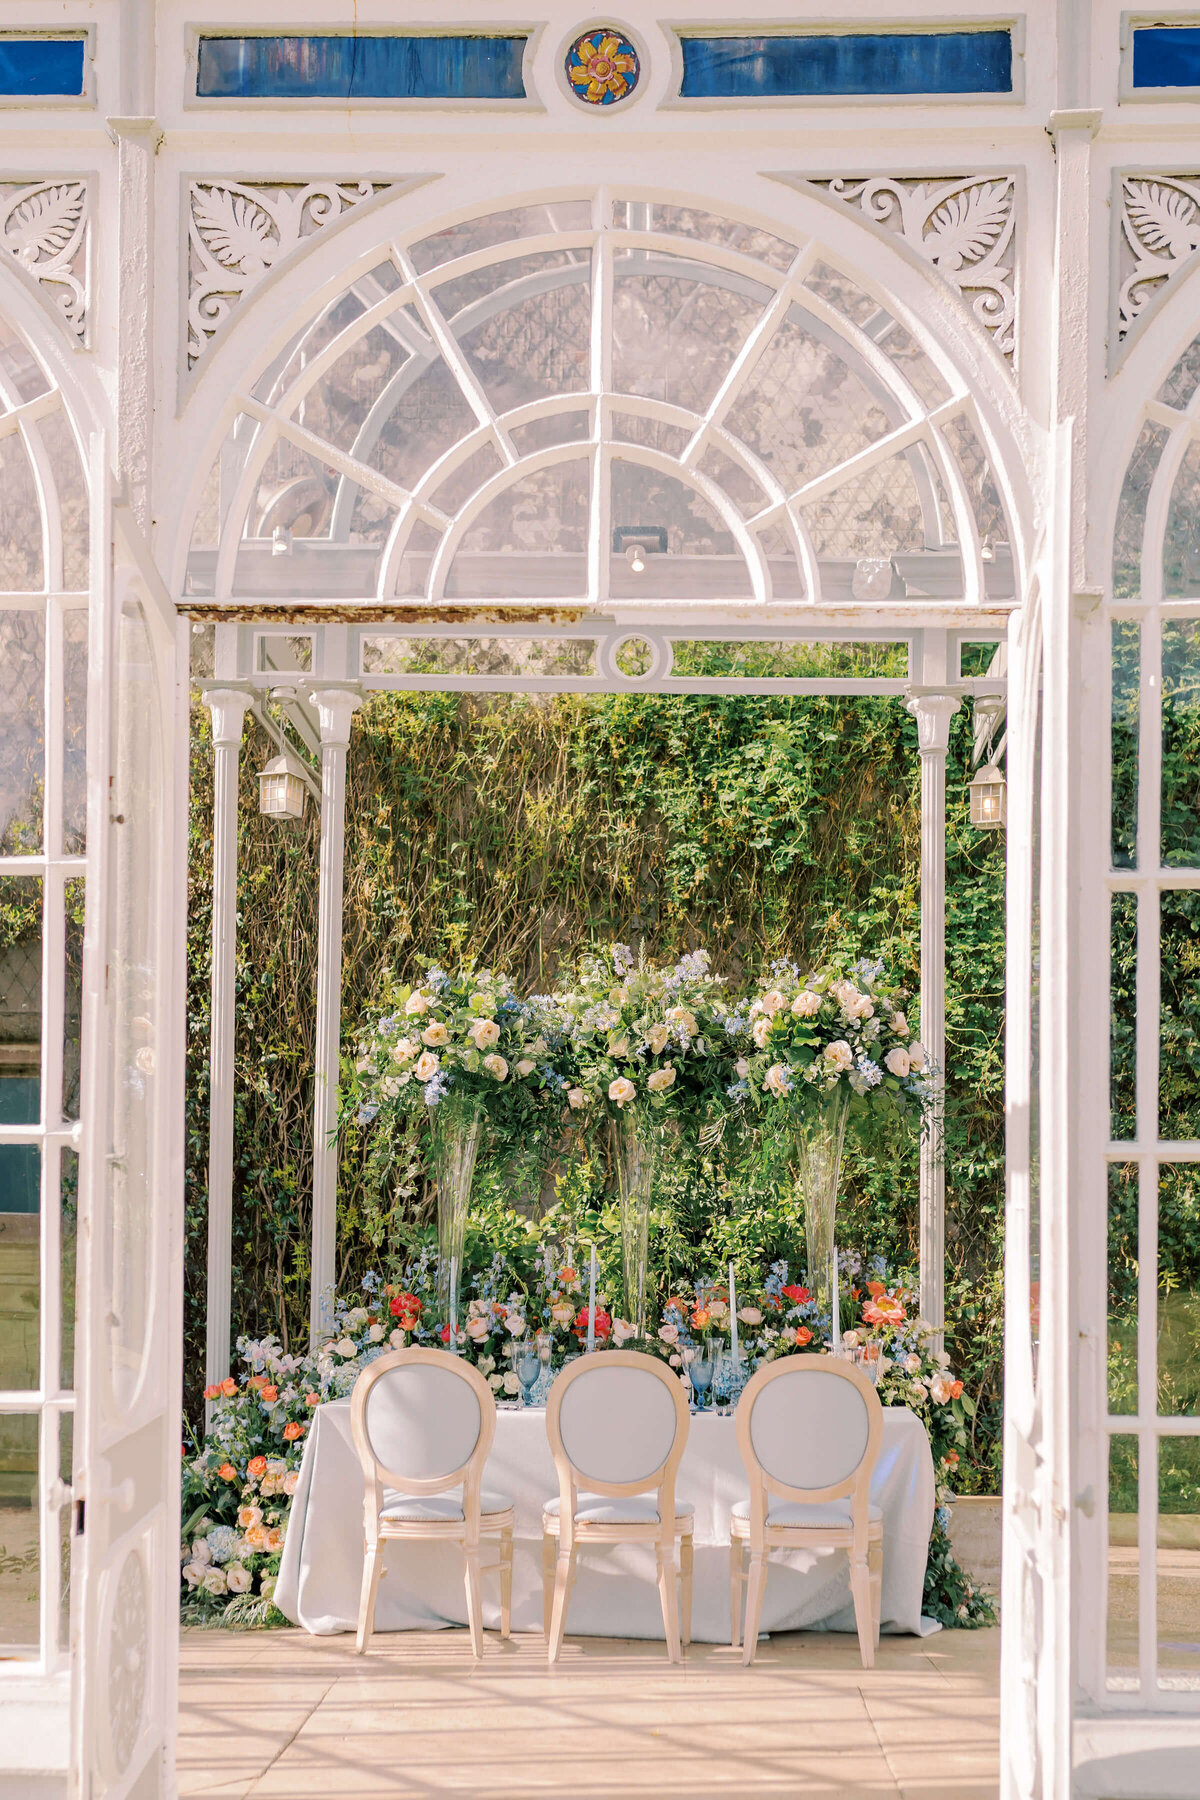 orangery glasshouse at avington park with a blue and coral themed wedding dinner table set up with blue chairs and foliage backdrop behind it